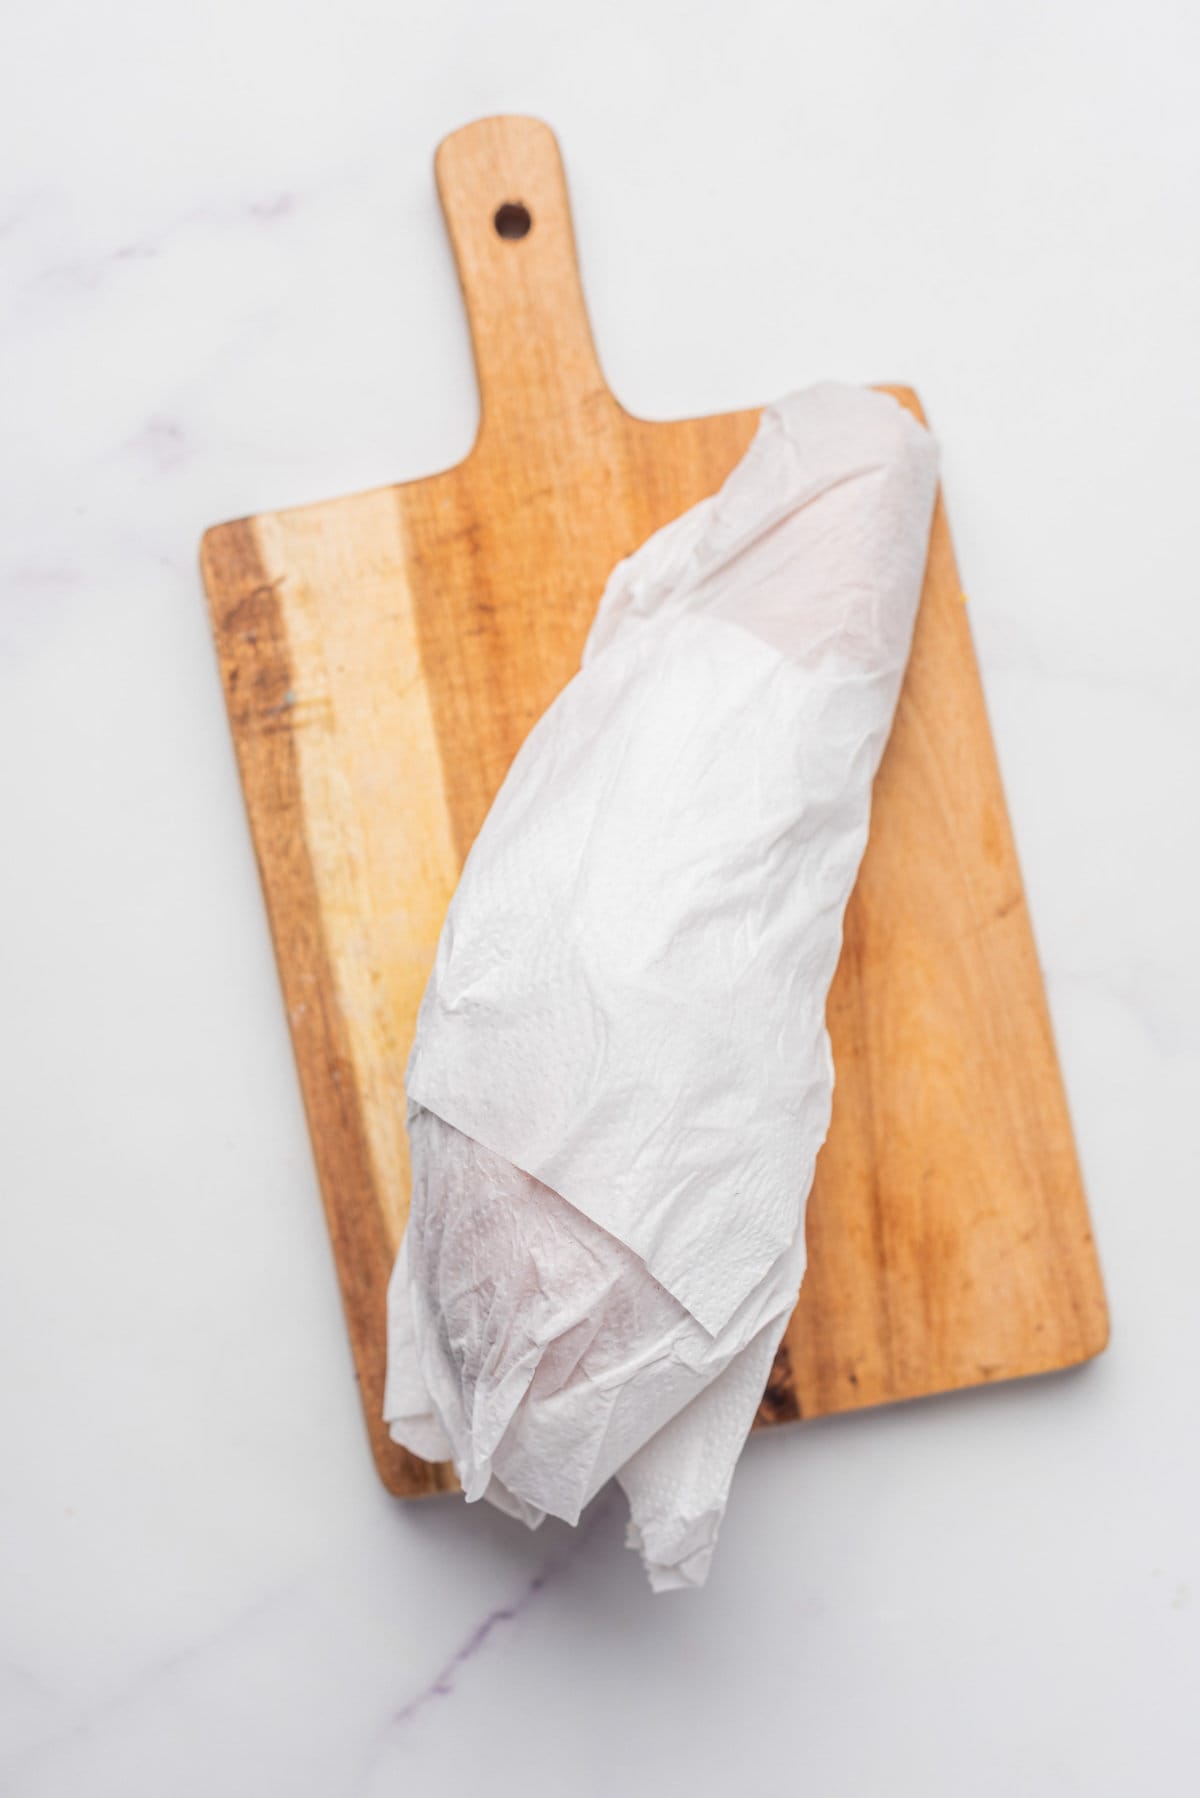 An image of sweet potato wrapped in a paper towel while resting on a chopping board.